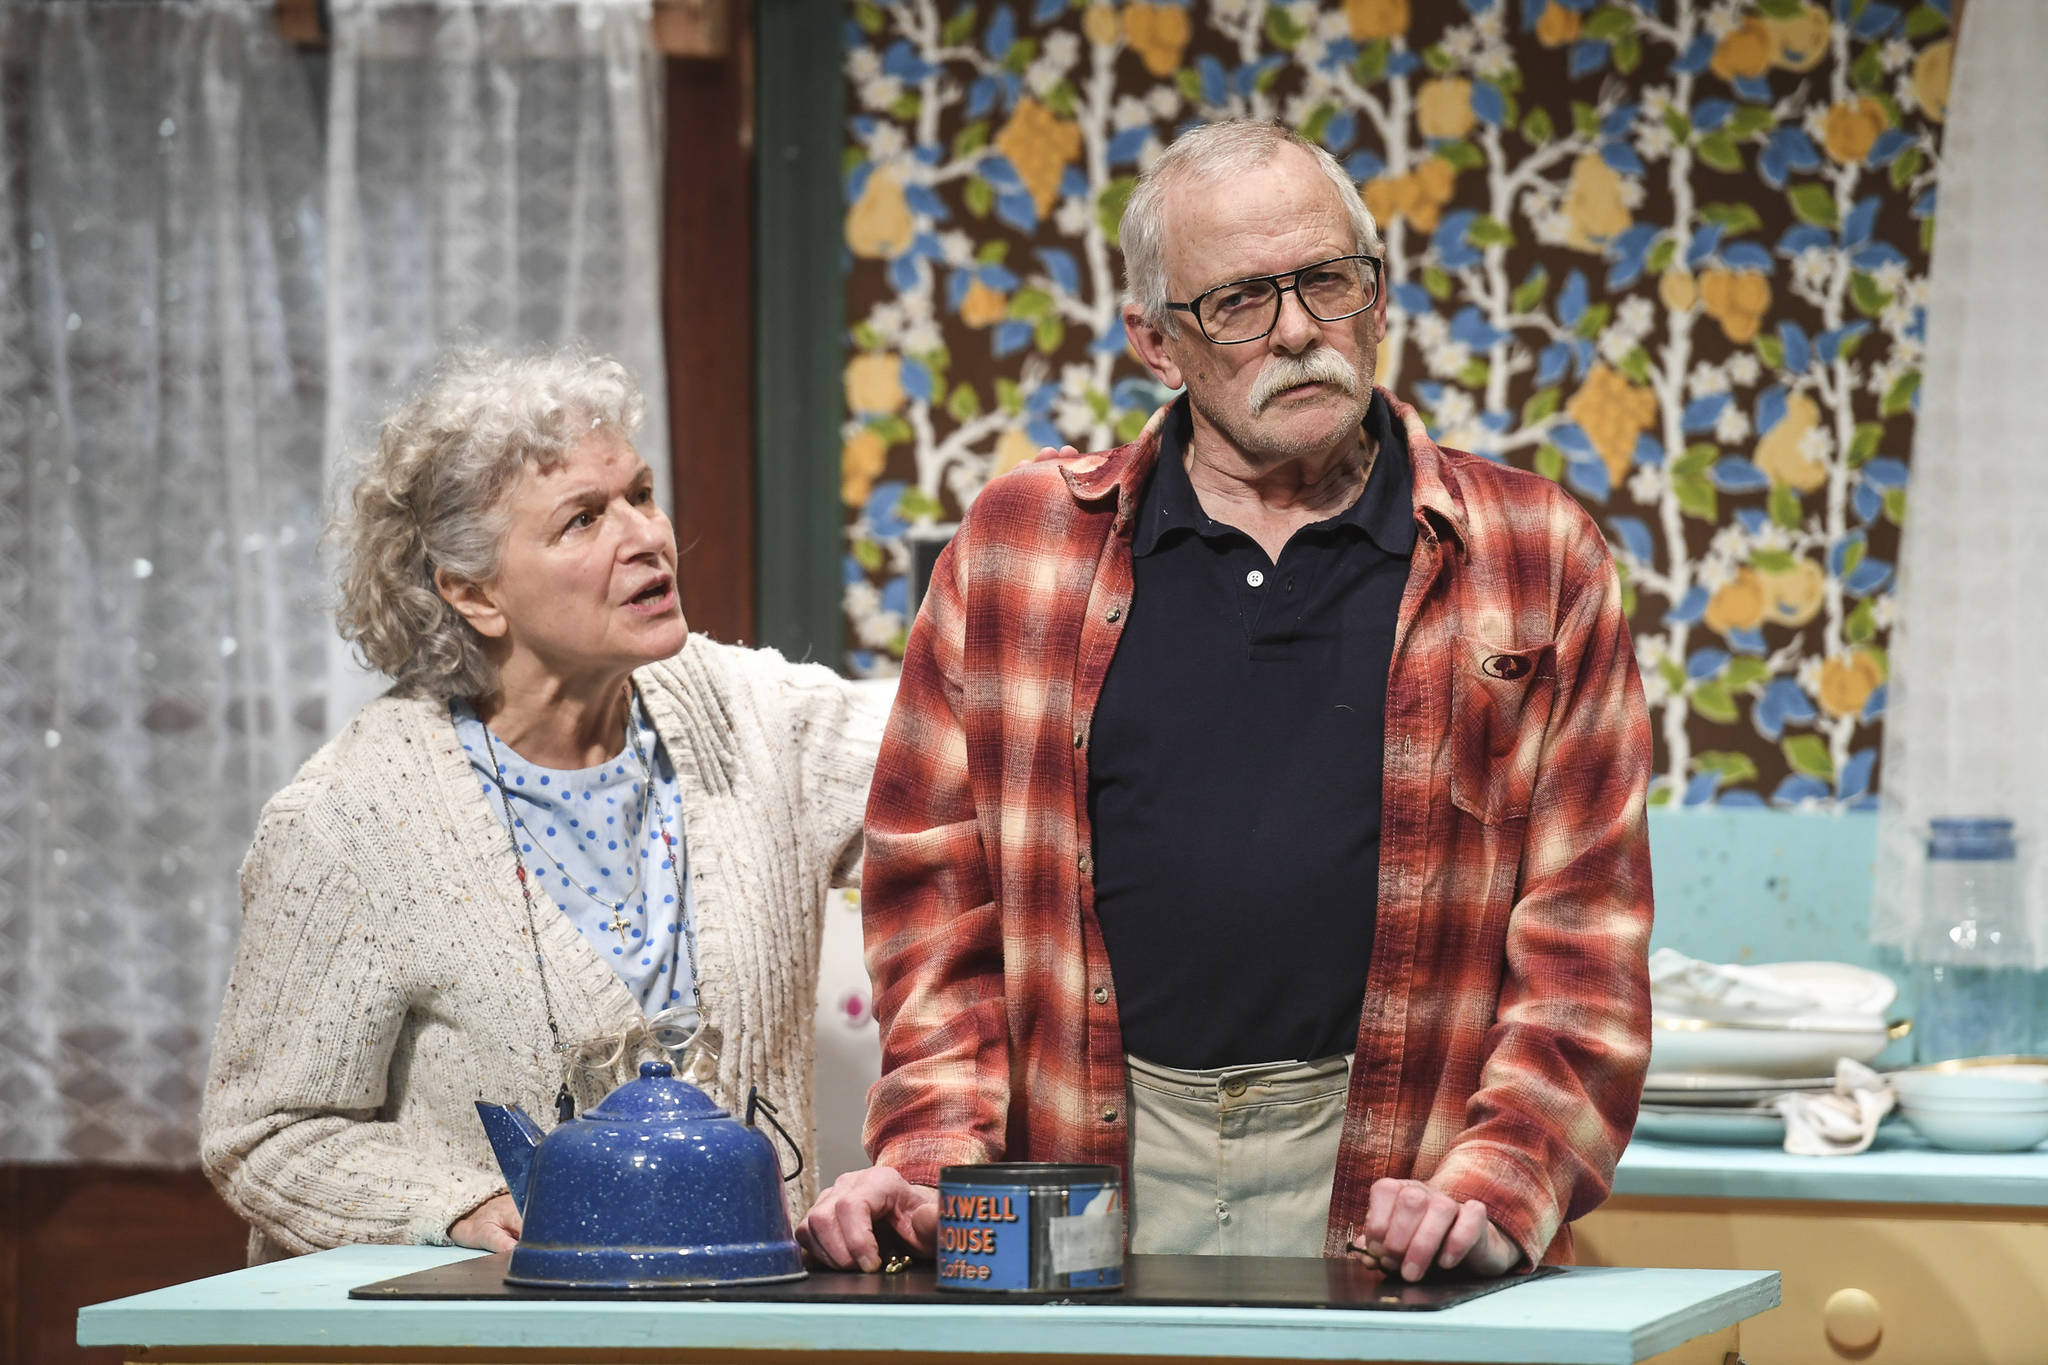 Clifford, played by Charlie Cardwell, and Minnie, played by Angelina Fiordellisi, rehearse in Perseverance Theatre’s production of “With” by playwright Carter Lewis on Tuesday, Nov. 19, 2019. “With” opens Friday Nov. 22 and runs through Dec. 15. (Michael Penn | Juneau Empire)